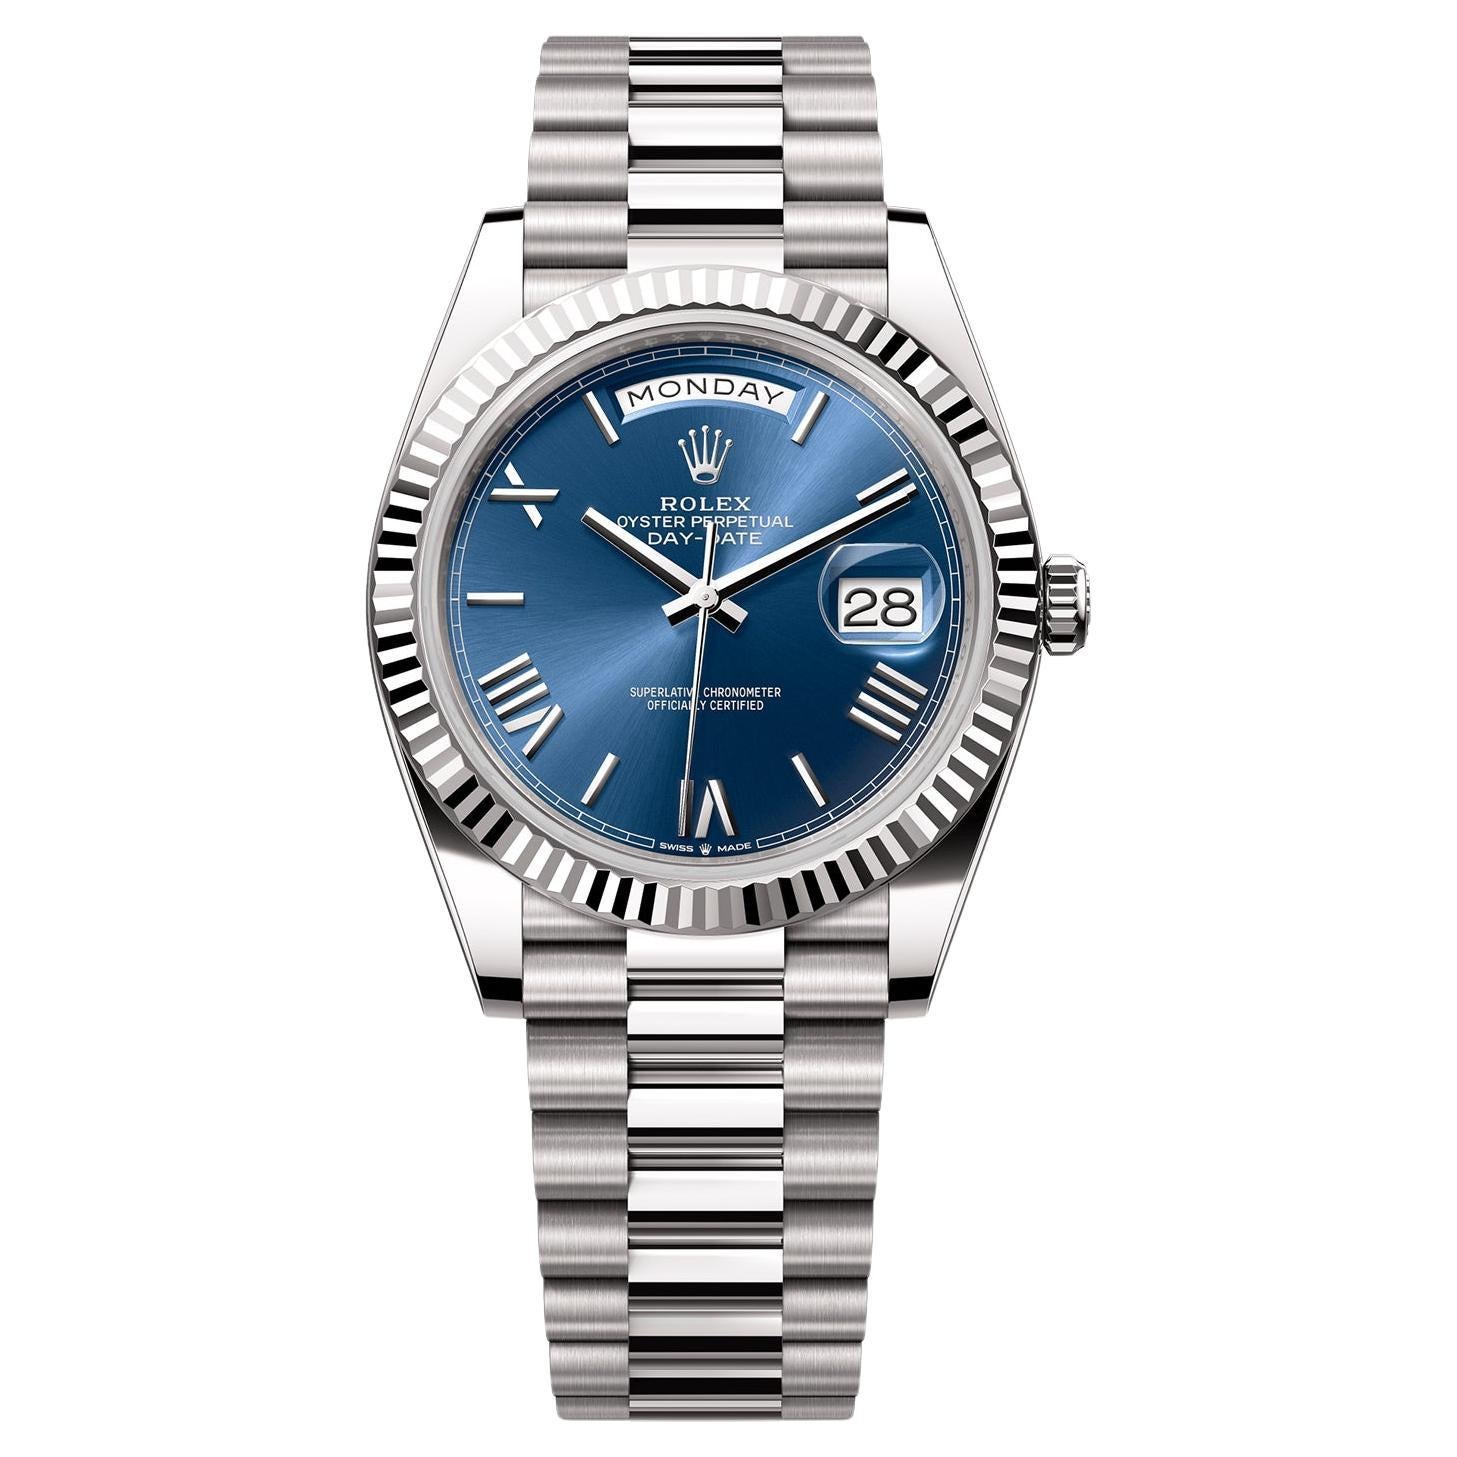 Rolex Day-Date 40mm White Gold Bright Blue Roman Dial Fluted Bezel Watch 228239 For Sale